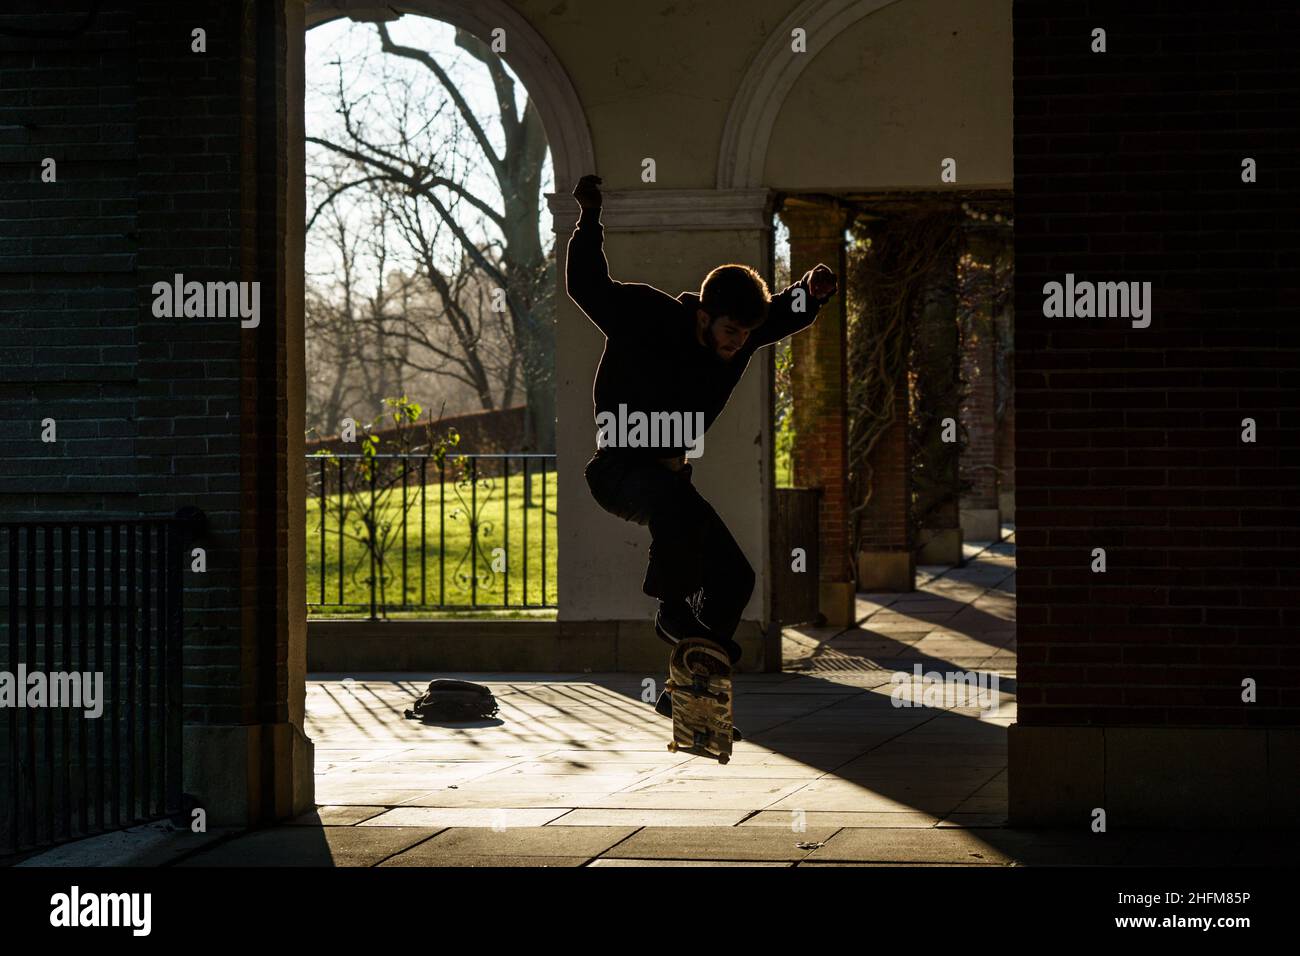 A skateboarder in Valley Gardens, Harrogate, raises his arms in the air as he performs a huge air jump, North Yorkshire, England, UK. Stock Photo